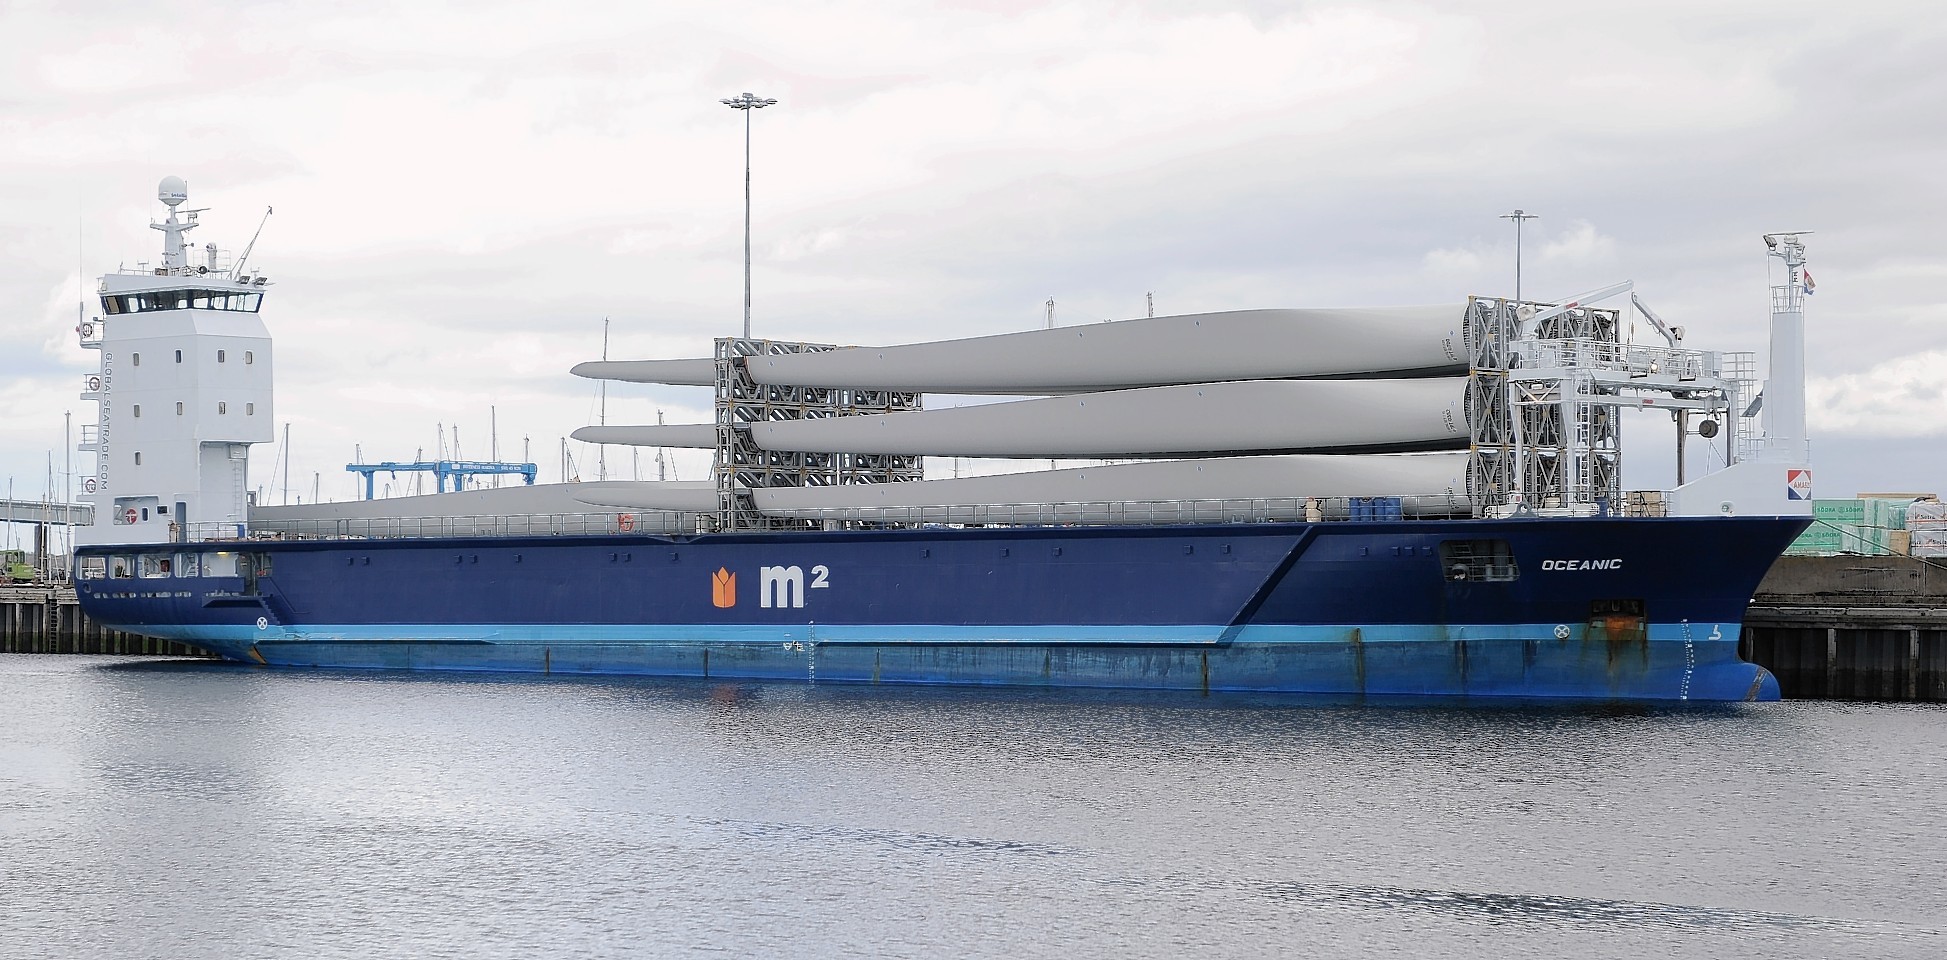 The ship. 'Oceanic' carrying wind turbine blades at Inverness Harbour.